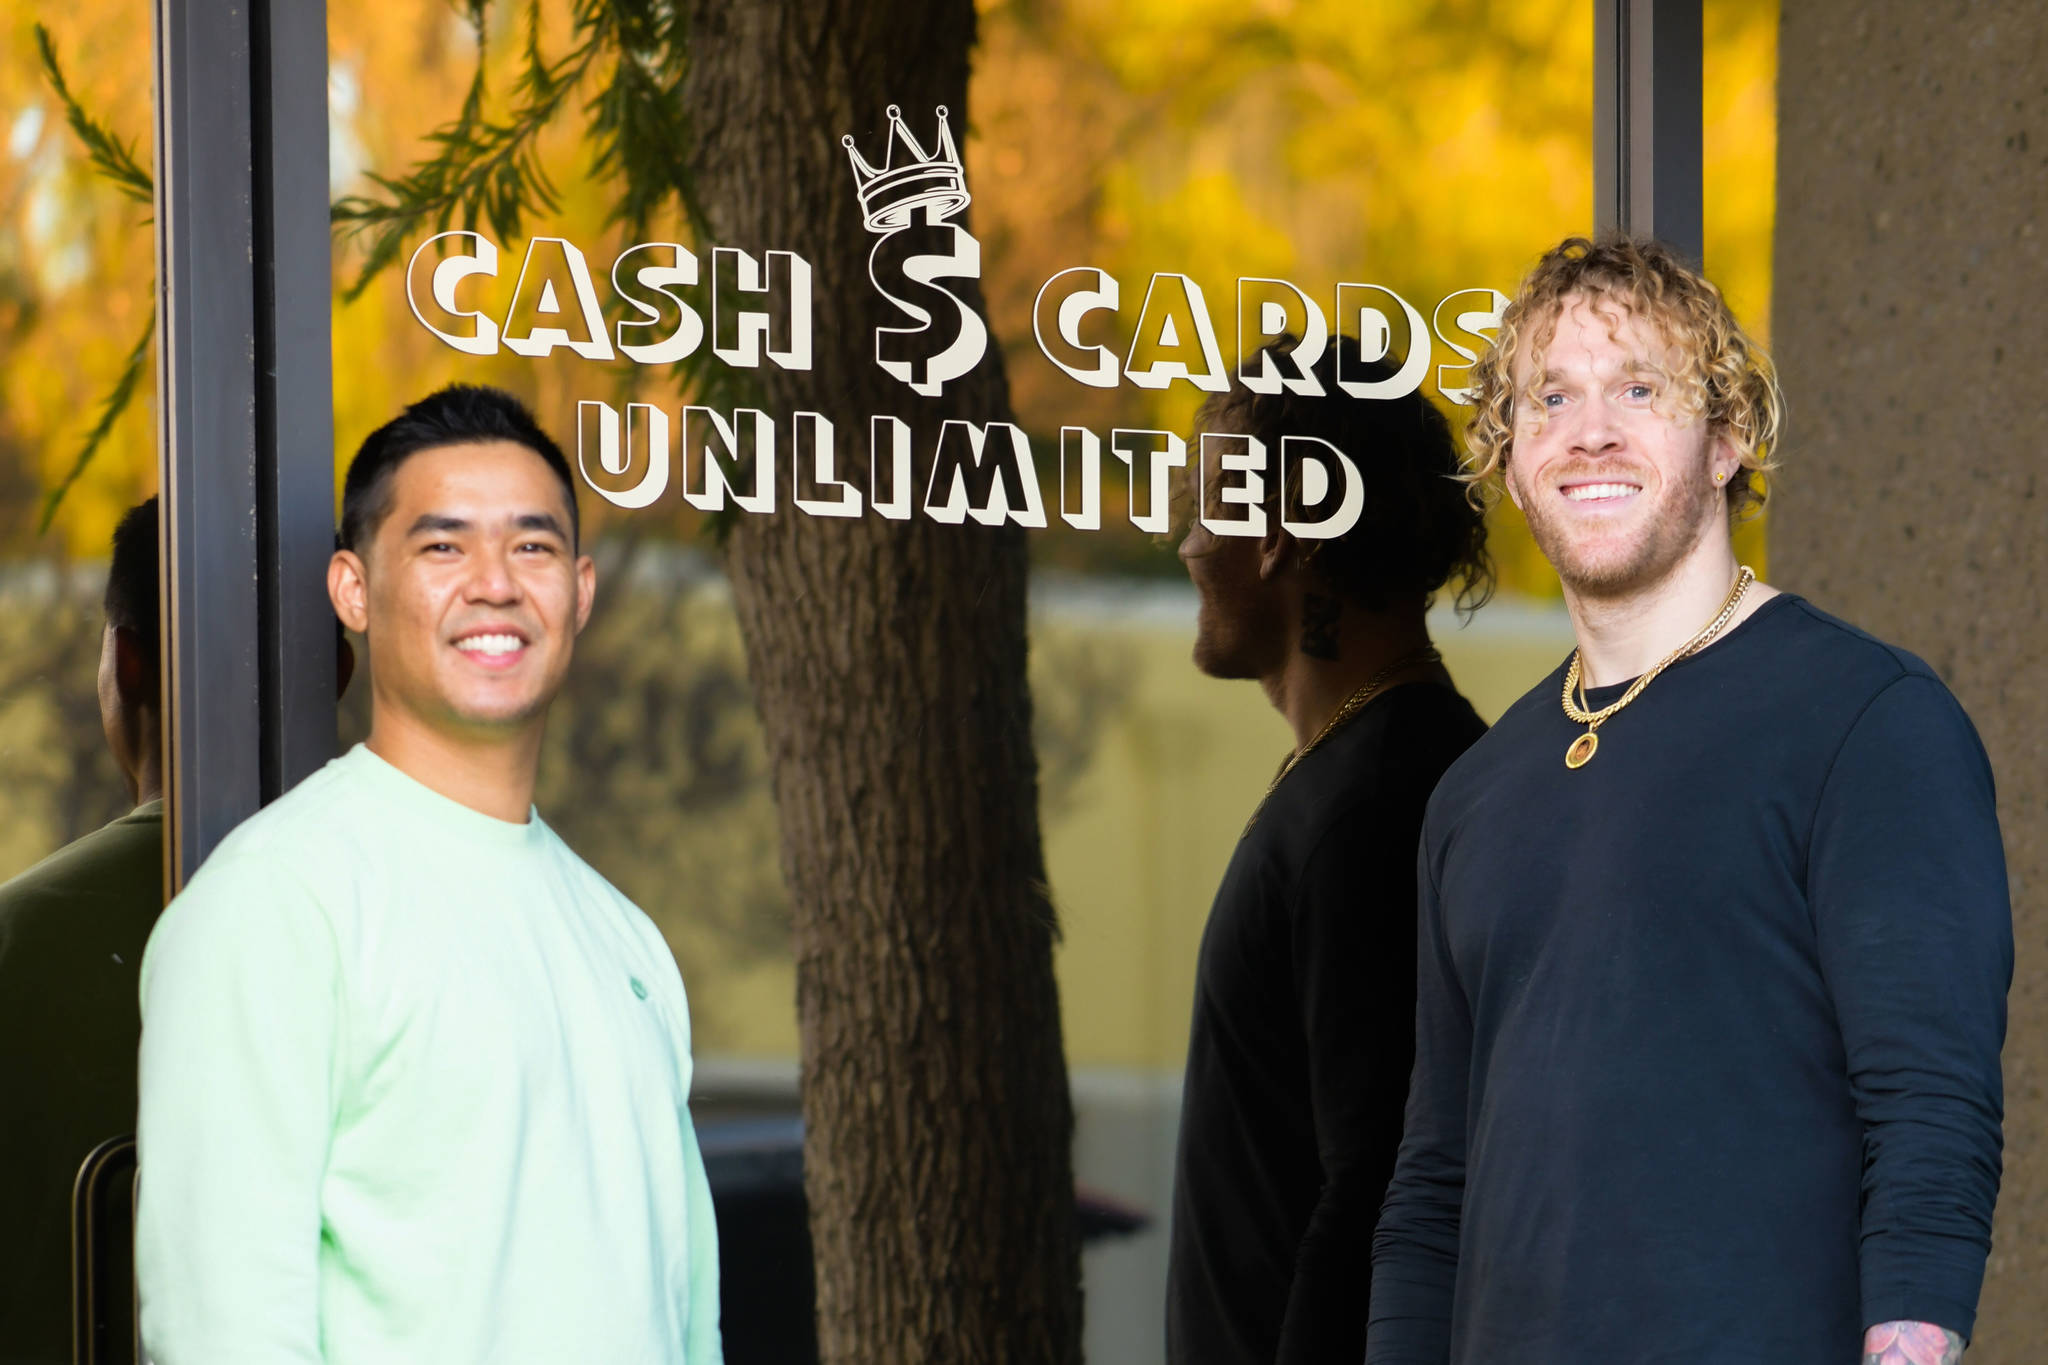 Cash Cards Unlimited partners, left: Nick Nugwynne, right: Cassius Marsh (photo credit: Cash Cards Unlimited)